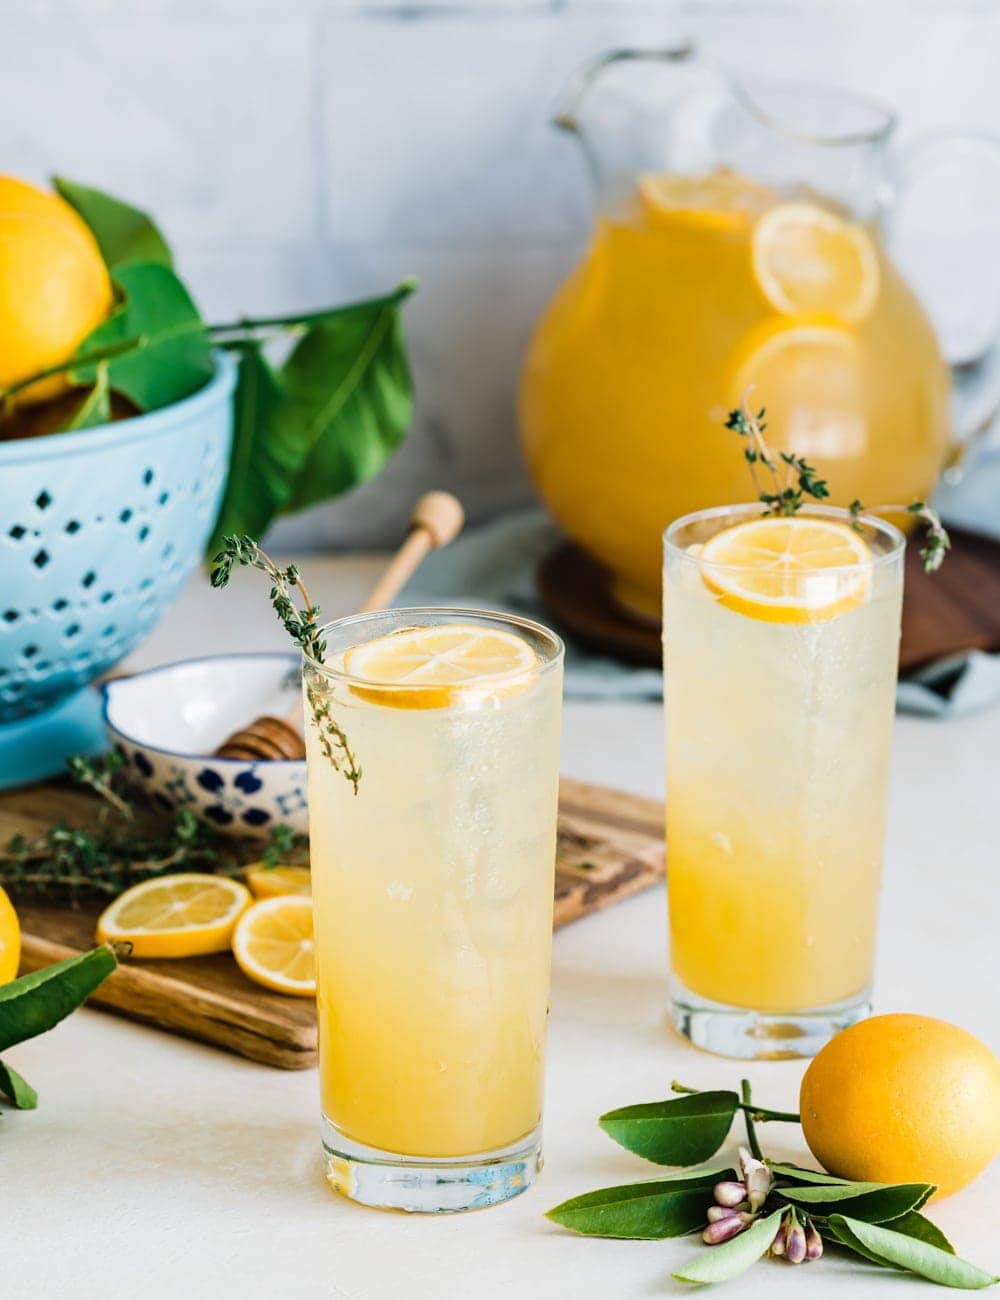 two tall collins glasses filled with lemonade, lemon slices and fresh thyme in glasses, pitcher or lemonade, fresh whole lemons, blue bowl with lemons, cutting board with lemon slices